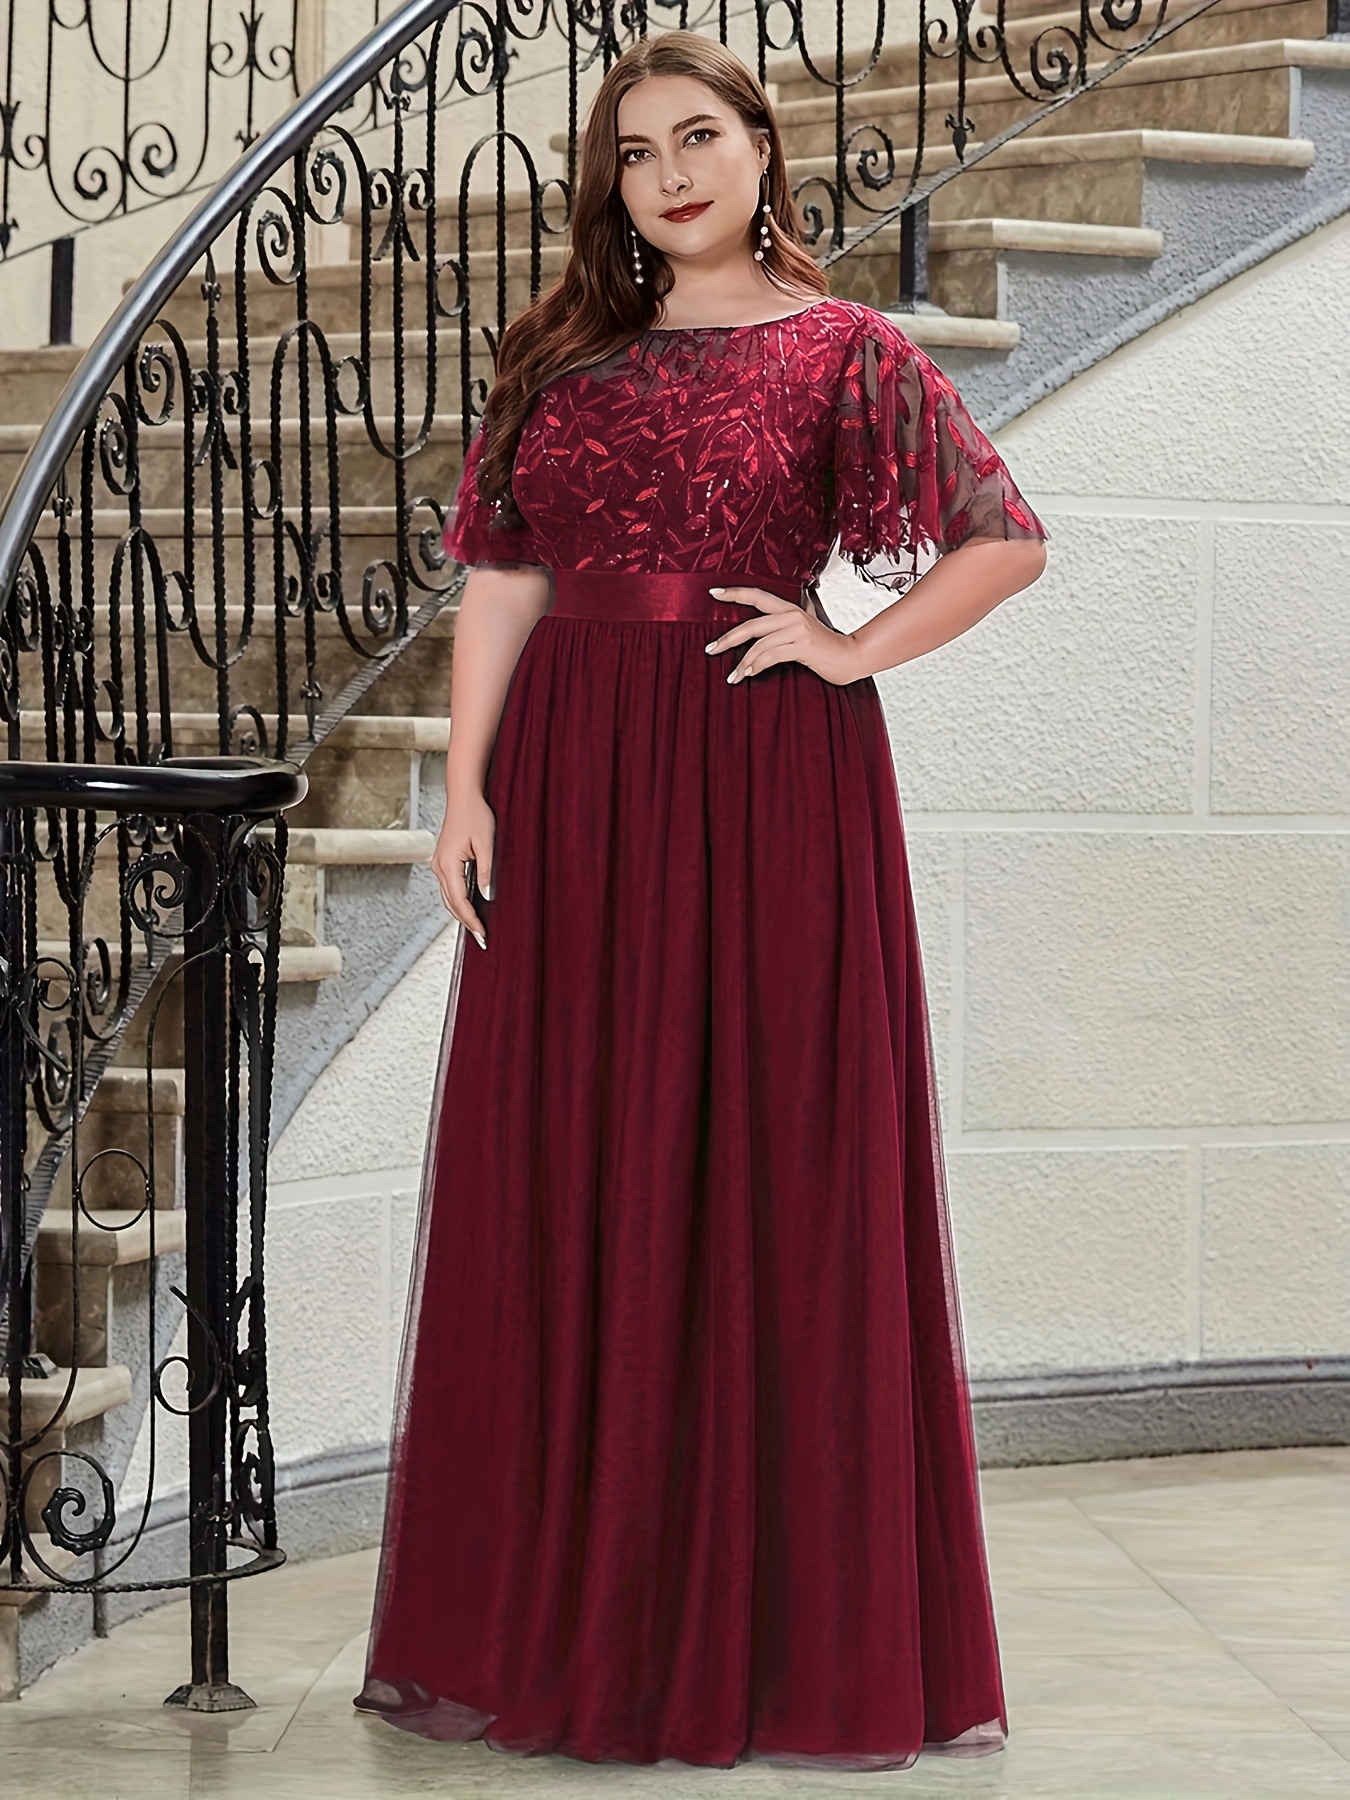 wedding guest outfits for women - Google Search  Plus size wedding guest  dresses, Formal wedding guest dress, Plus size wedding dresses with sleeves